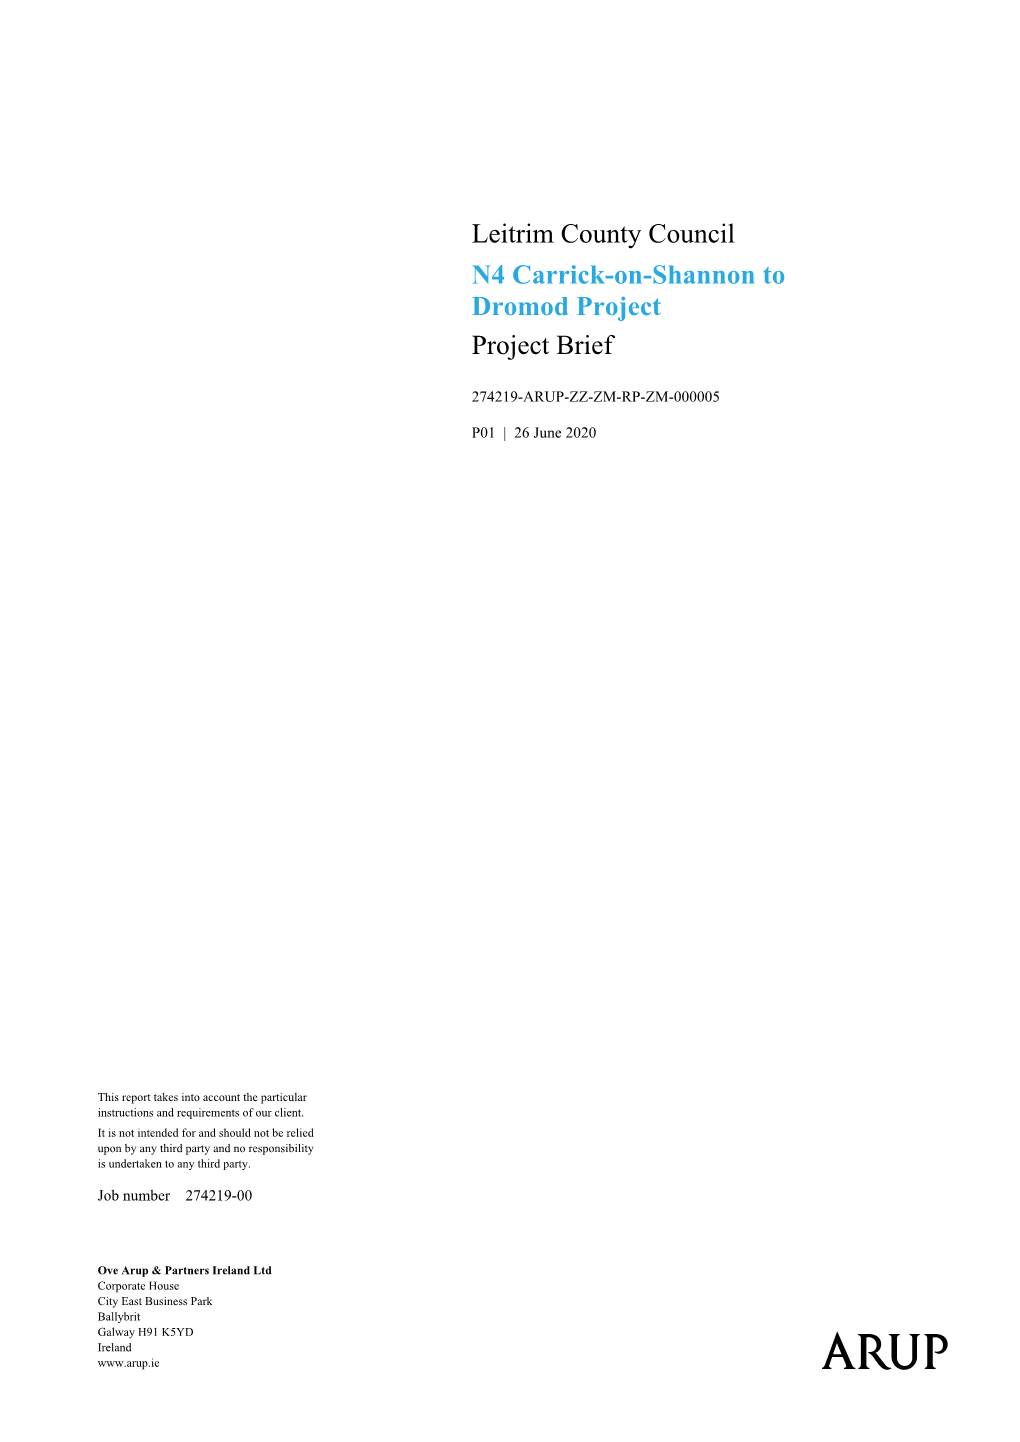 Leitrim County Council N4 Carrick-On-Shannon to Dromod Project Project Brief